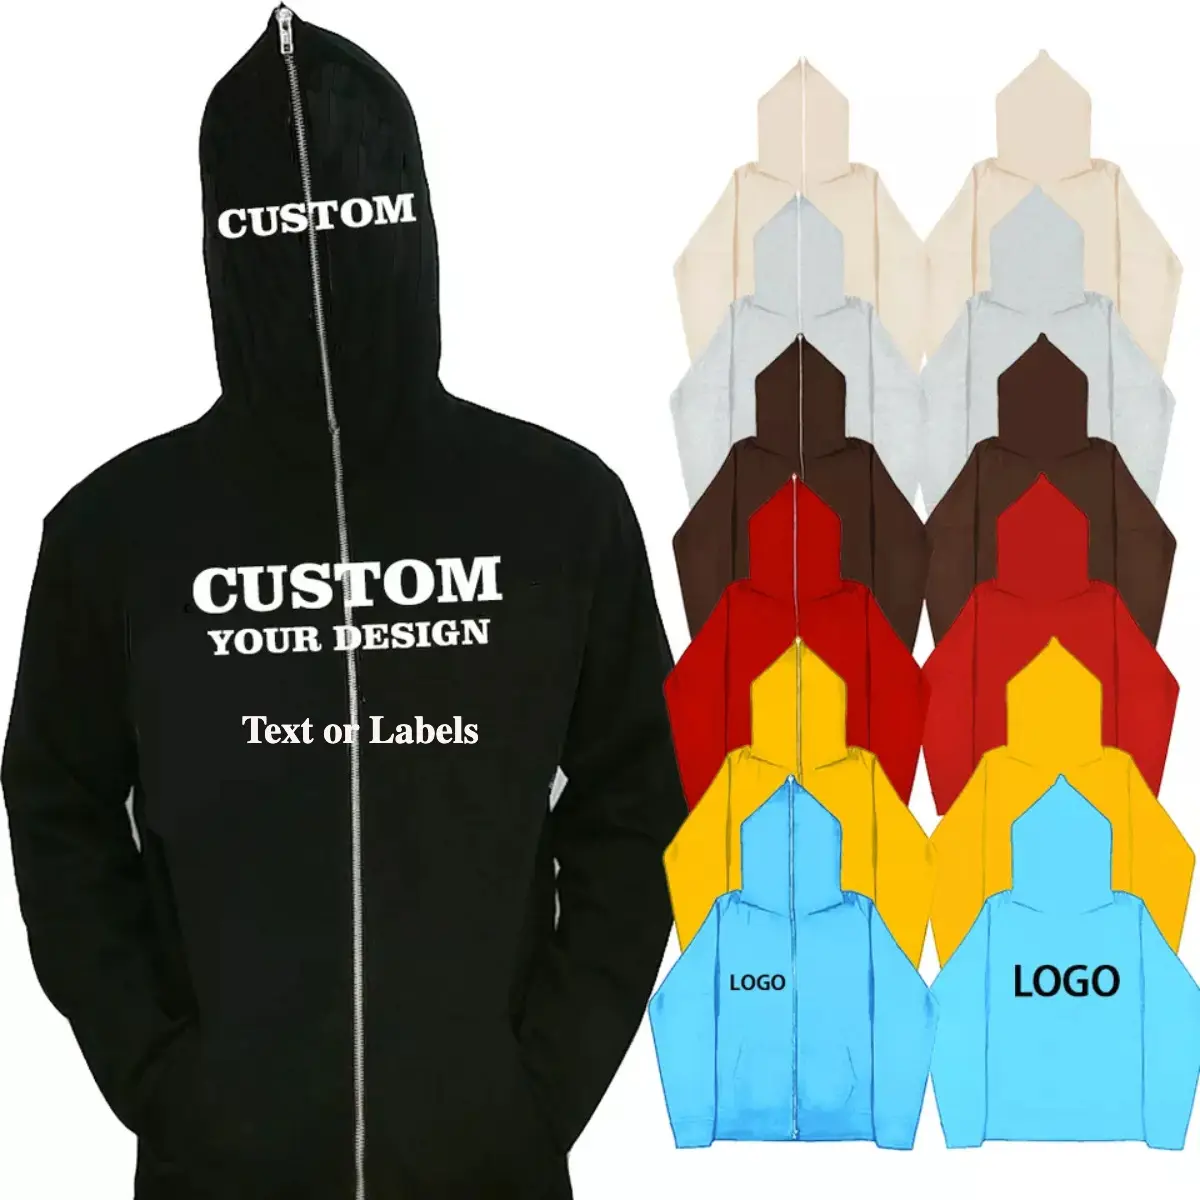 Hot-selling Full Zip Hooded Sweater With Shoulder Drop With your Logo Customized Men's Hoodie